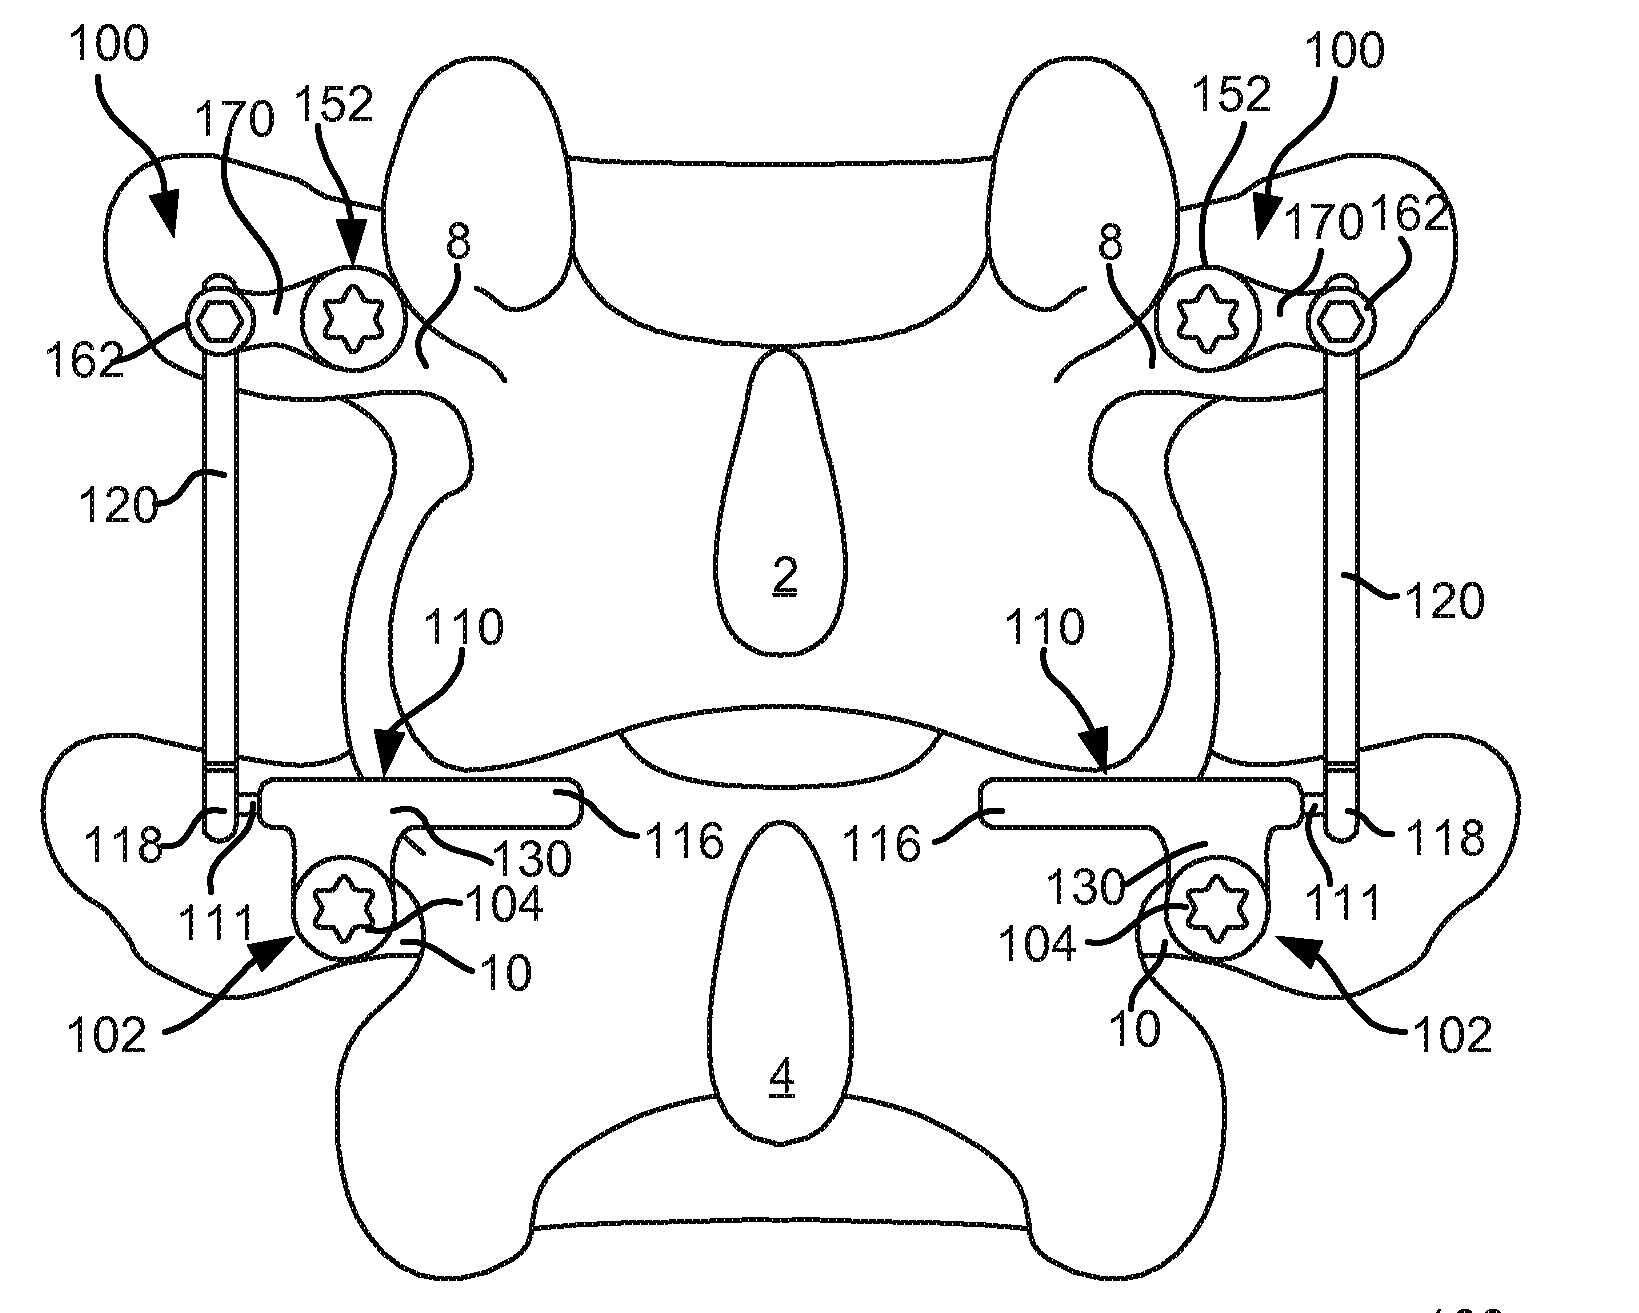 Modular in-line deflection rod and bone anchor system and method for dynamic stabilization of the spine